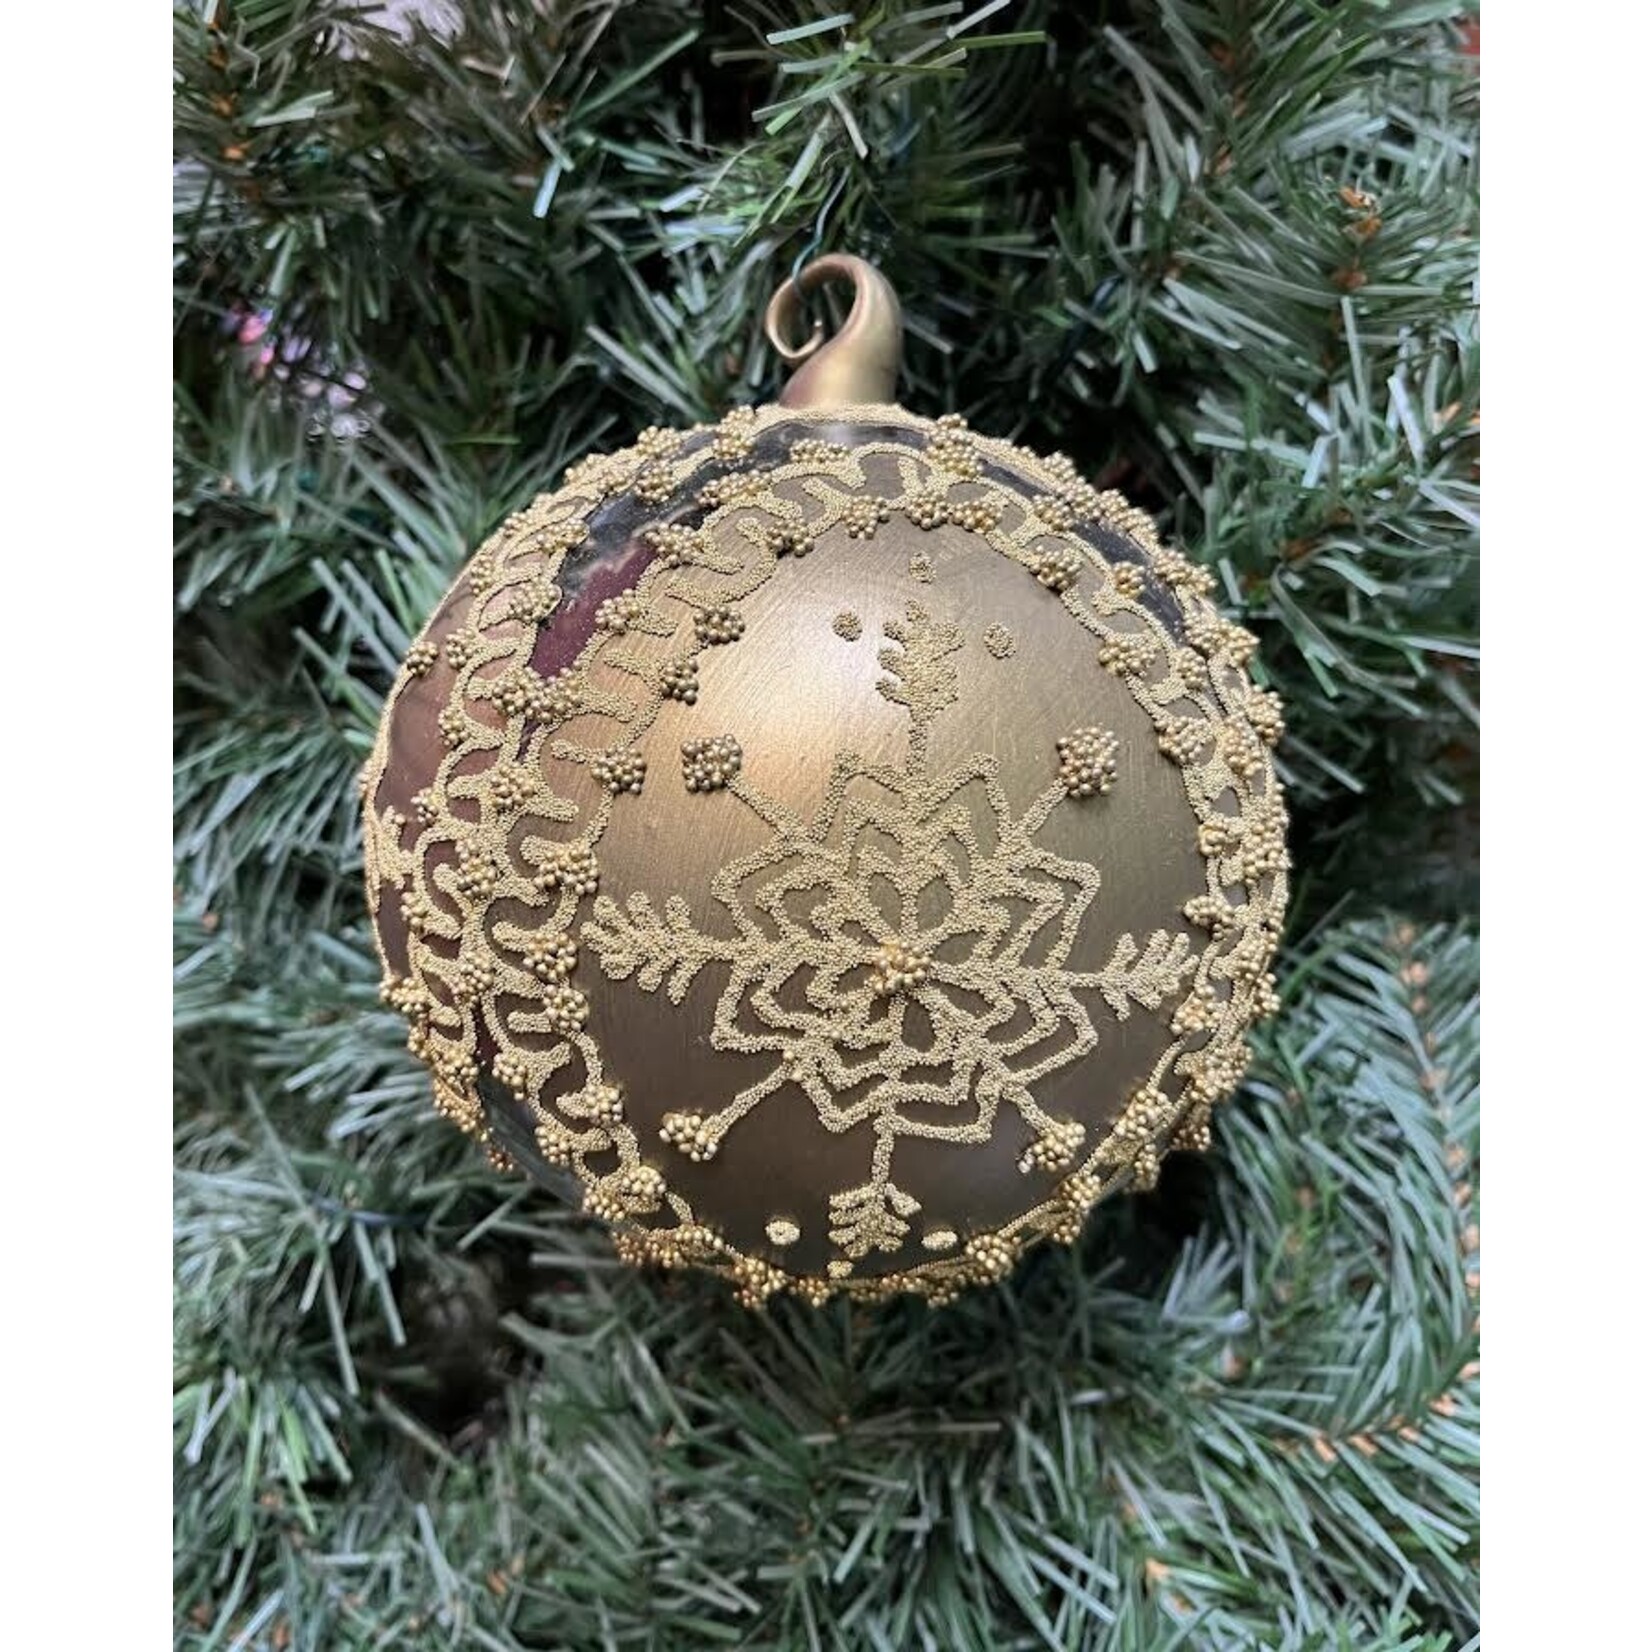 Peter Priess Gold Beaded Lace Christmas Ornament  5.5 "